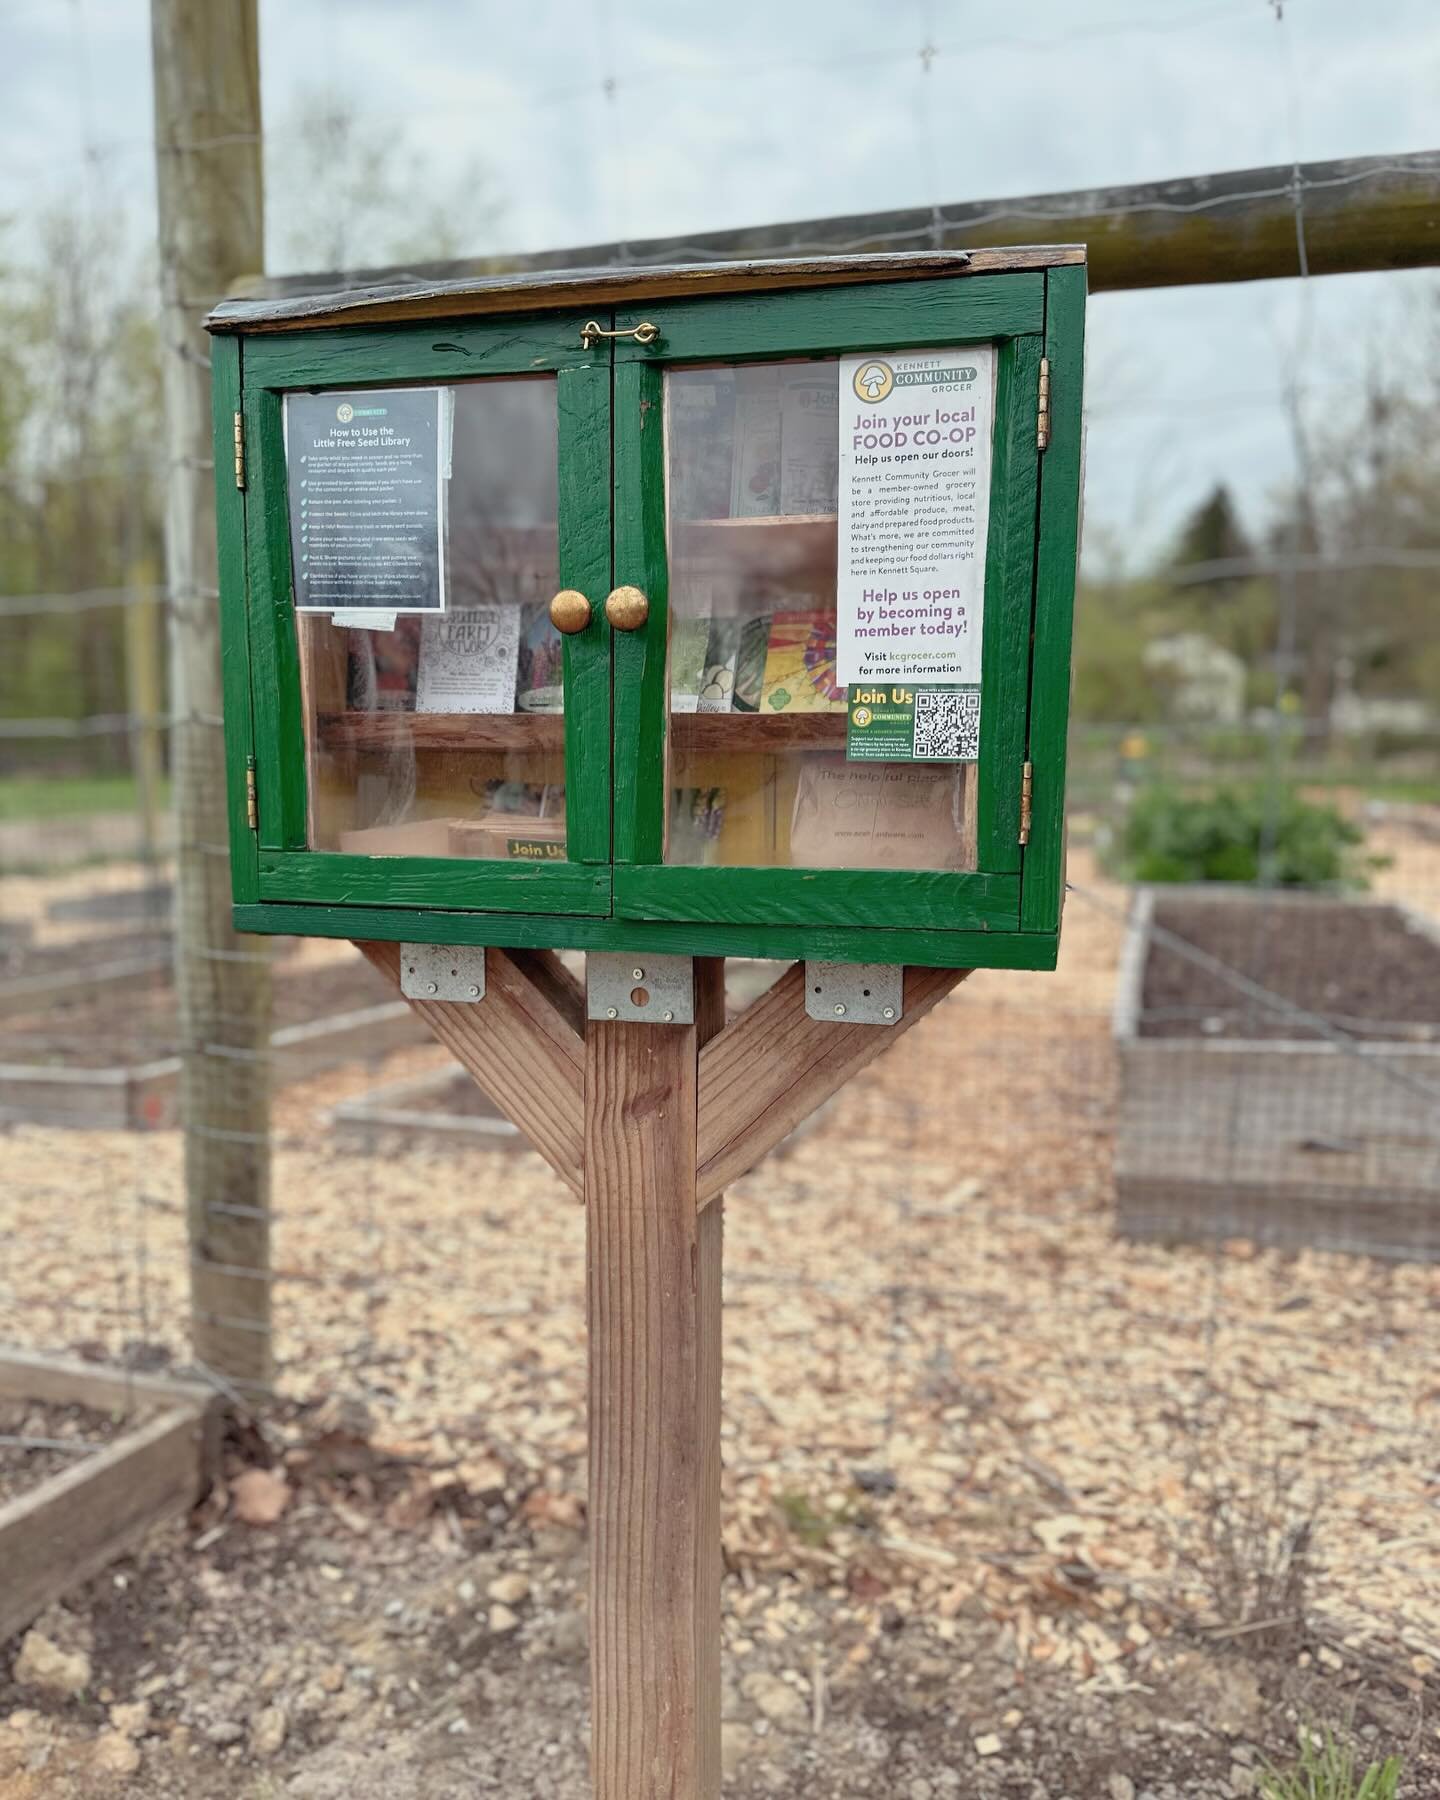 Last weekend, KCG repaired and reinstalled the Little Free Seed Library in Anson B Nixon Park during their cleanup event! It&rsquo;s next to the Community Garden plots used to grow delicious, nutritious, organic produce - much of it donated to local 